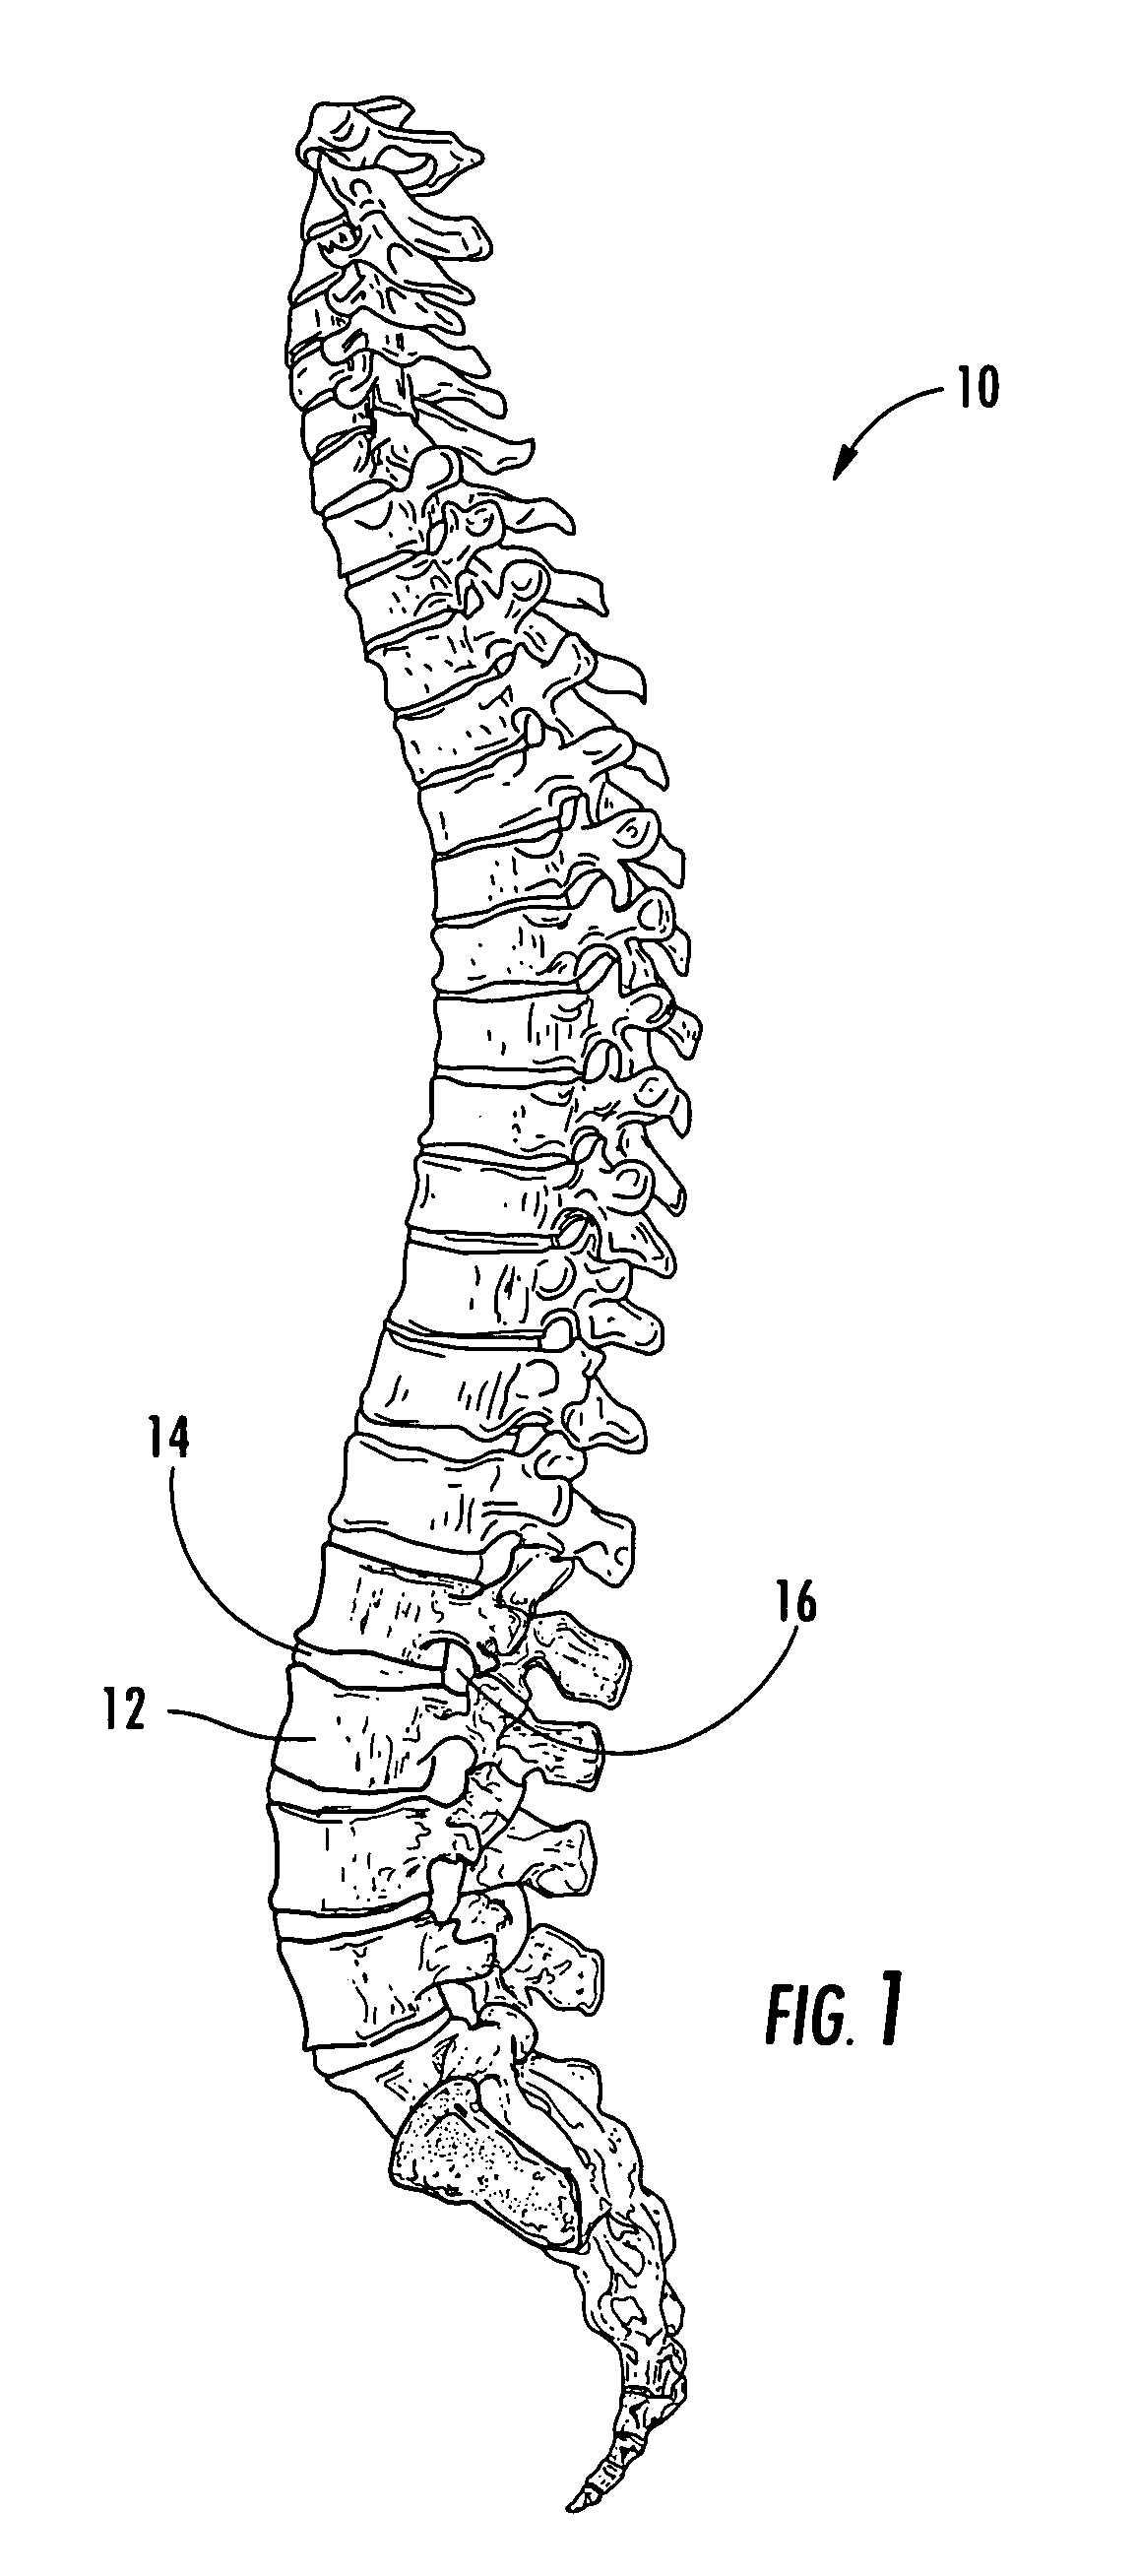 Method and apparatus for treatment of discogenic pain